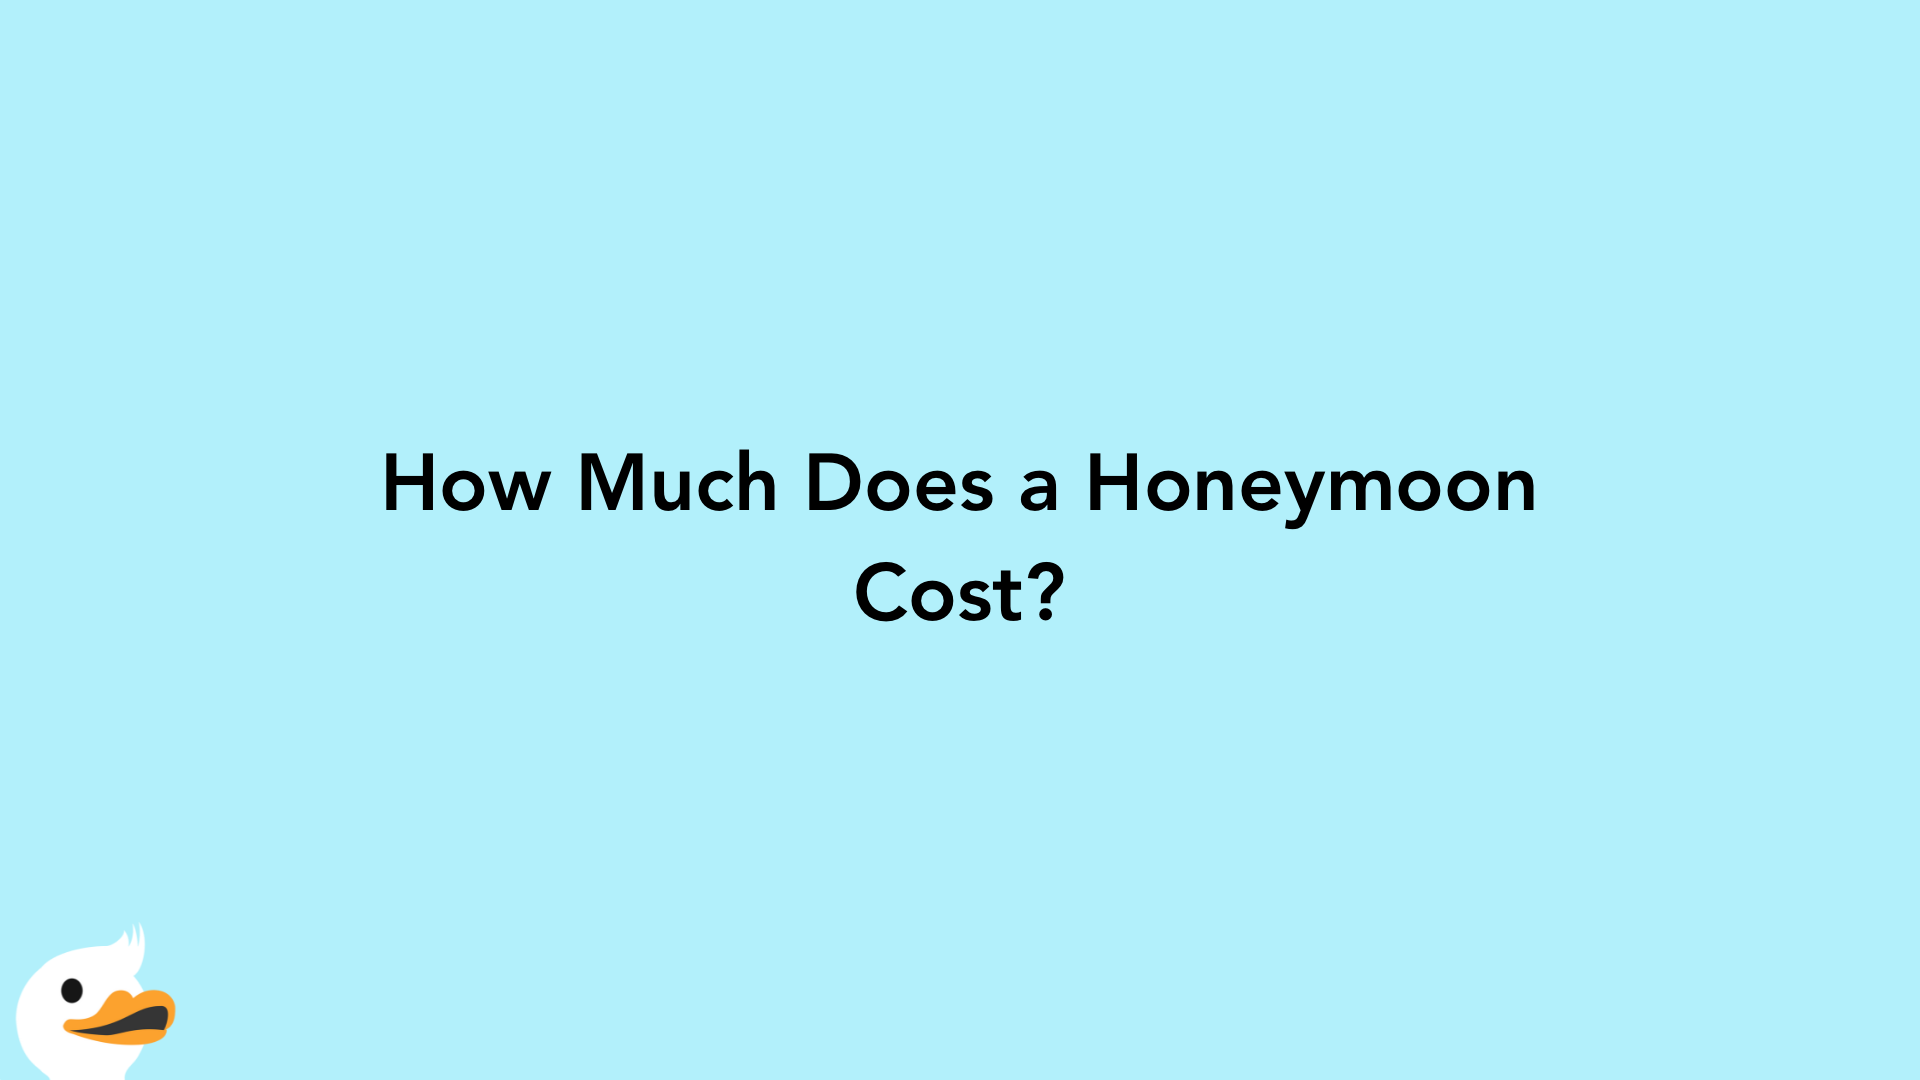 How Much Does a Honeymoon Cost?